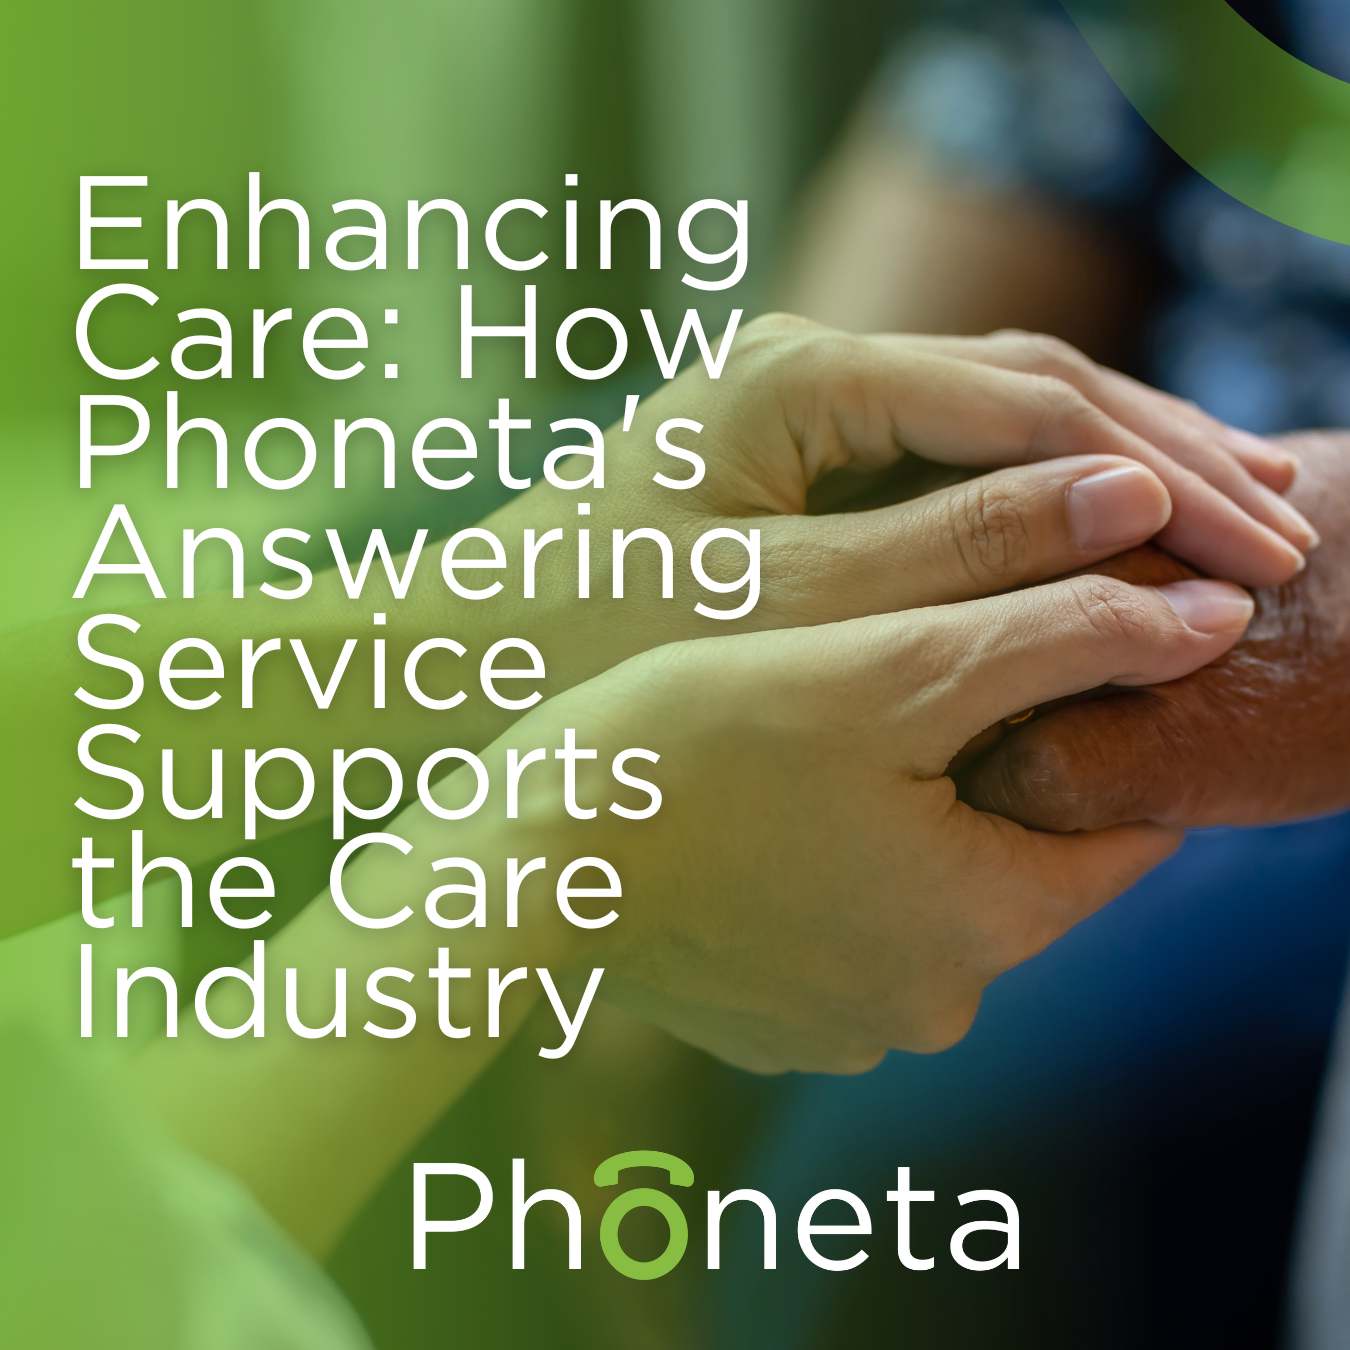 Enhancing Care: How Phoneta's Telephone Answering Service Supports the Care Industry